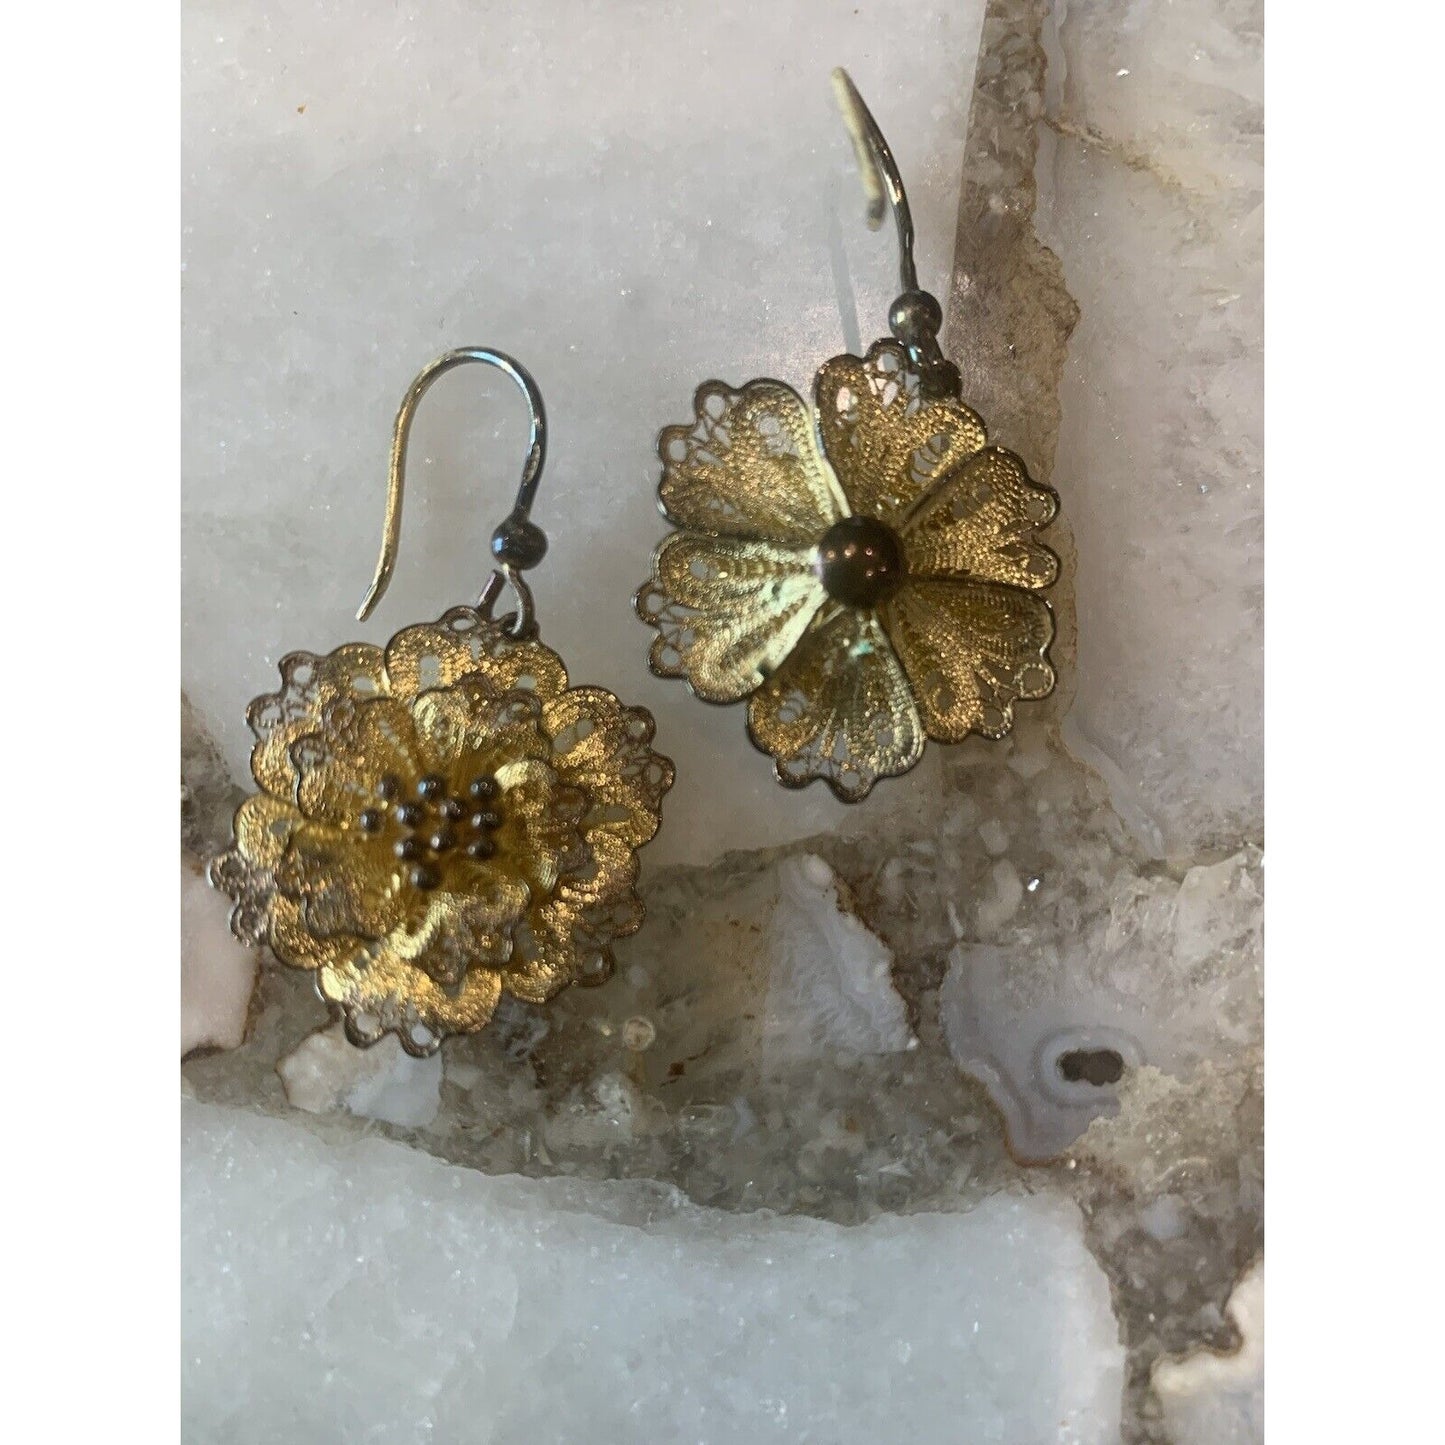 Gold-Plated Tarnished Filigree Drop Earrings In A Floral Daisy Motif